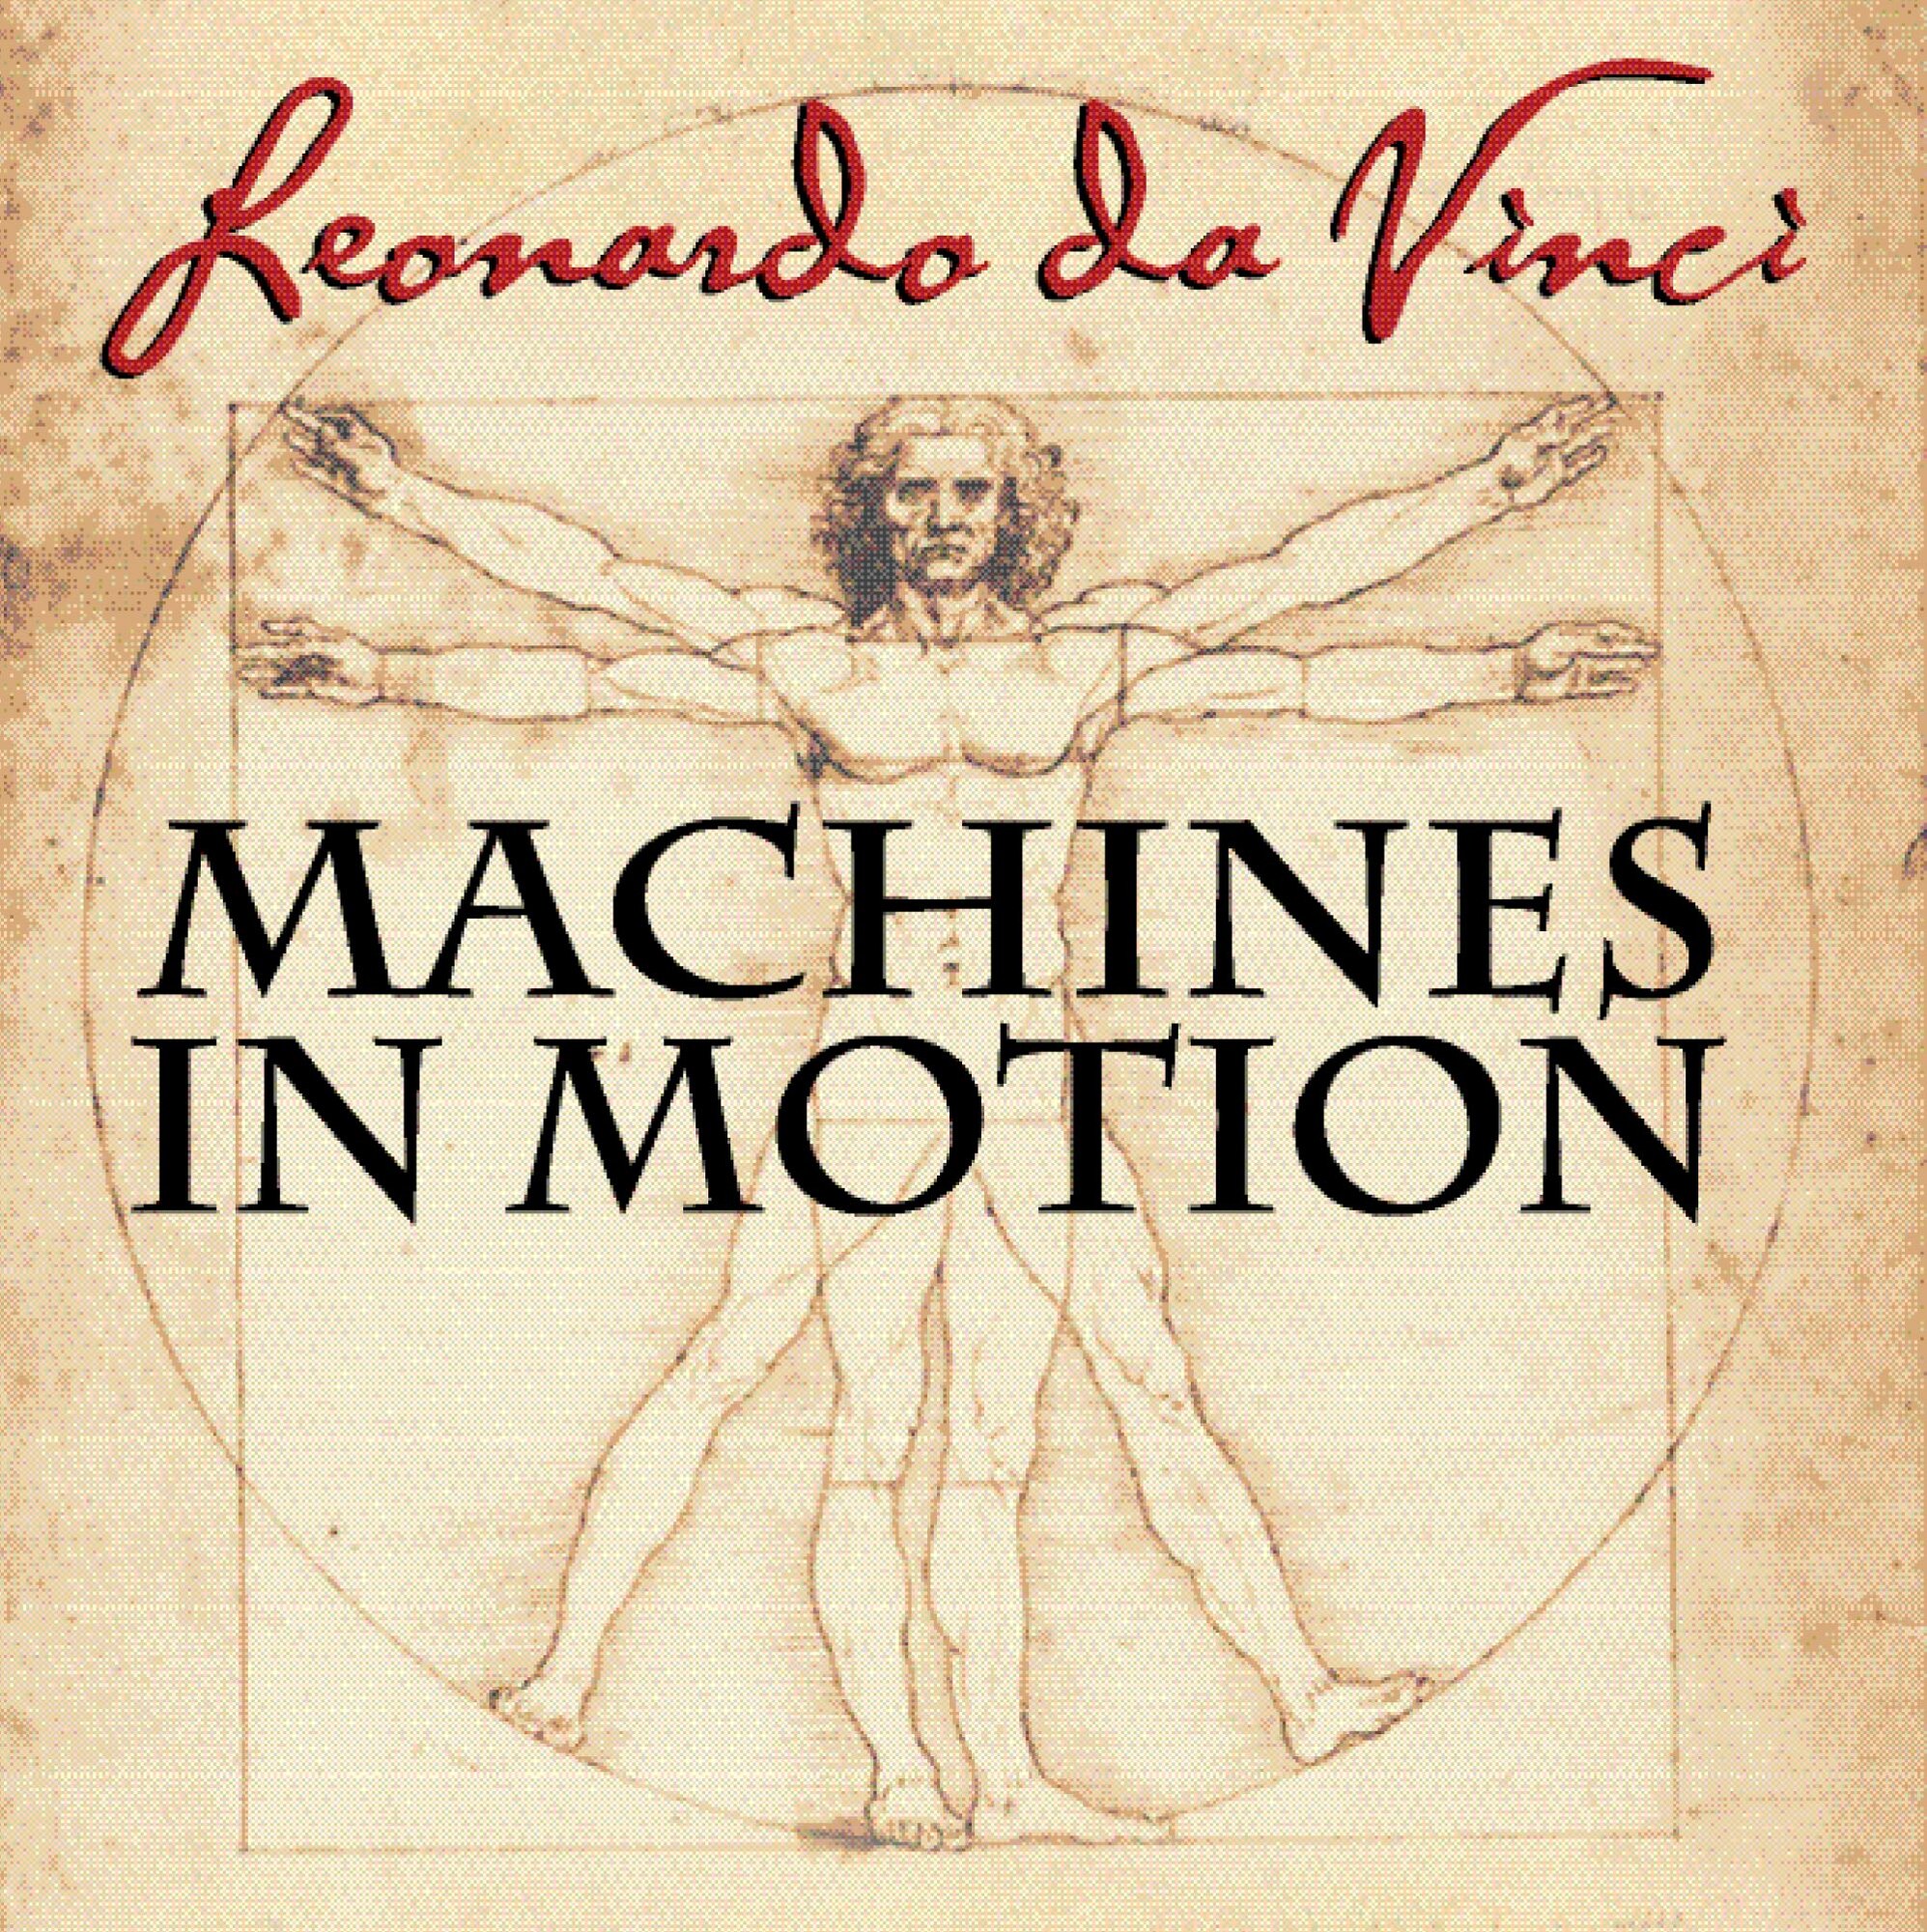 Leonardo da Vinci Machines in Motion will open Feb. 21 at the National Museum of the US Air Force.